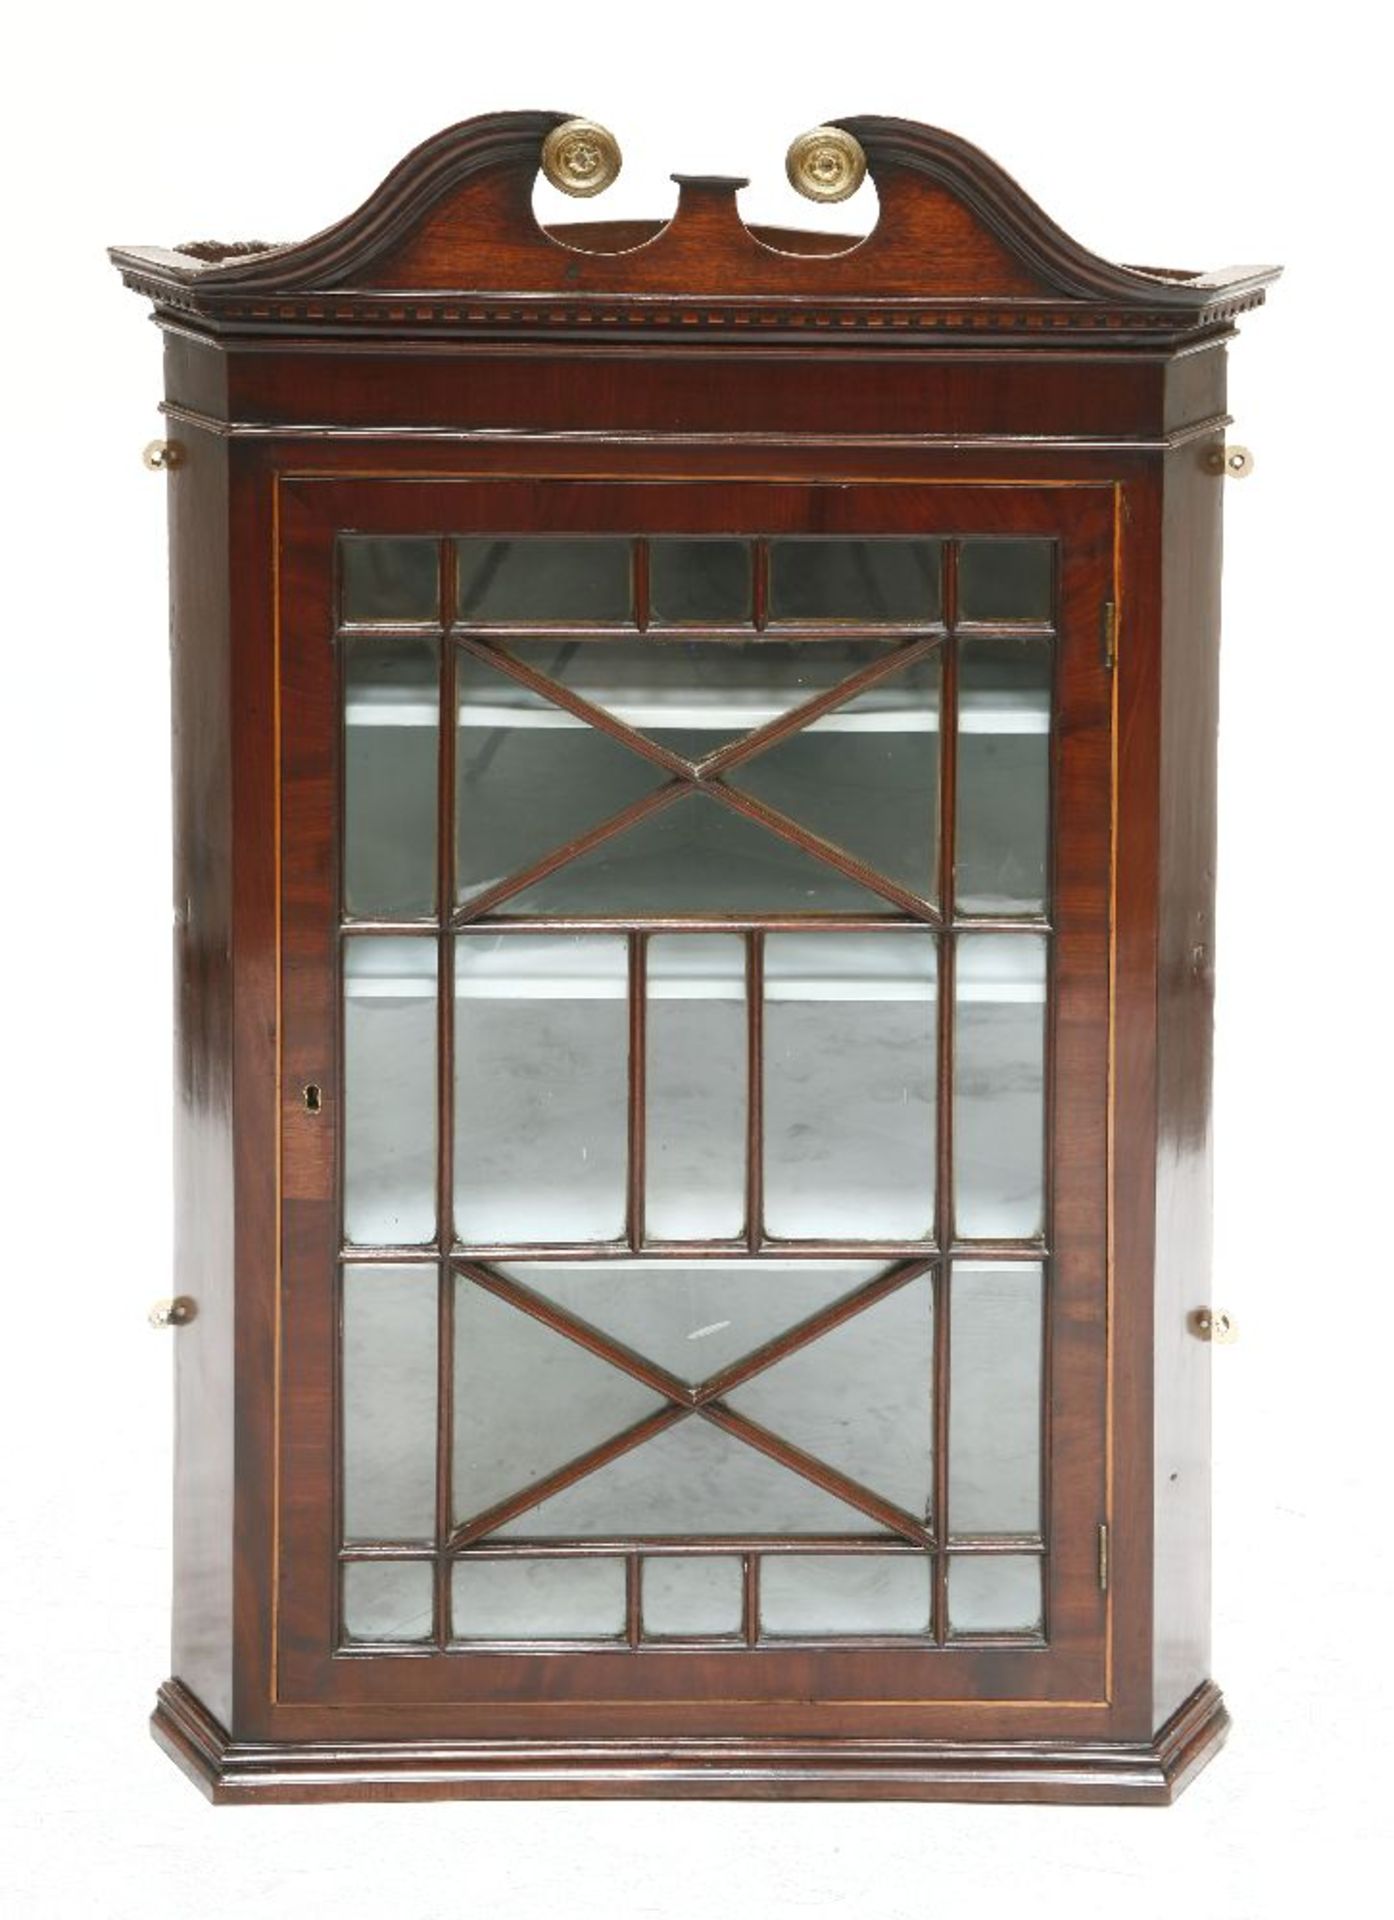 A George III-style mahogany hanging corner cupboard,late 19th century, with a scrolled cornice and